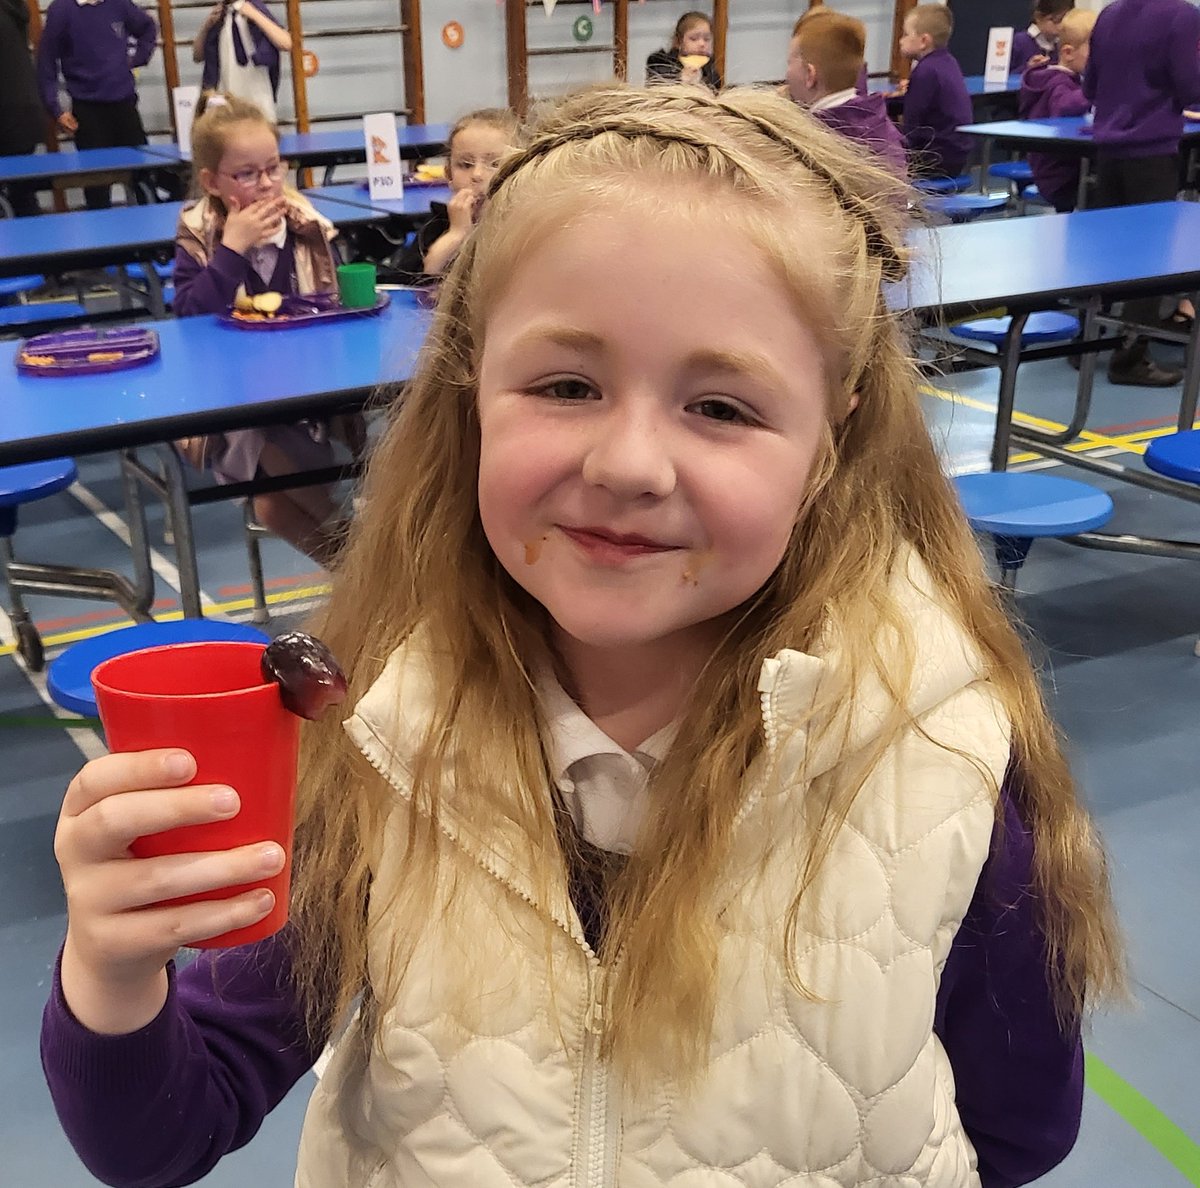 When you add a grape to your water to make it a Summer cocktail 😉🍹🤣👌🙌 #creativity #schoollunches #imagination